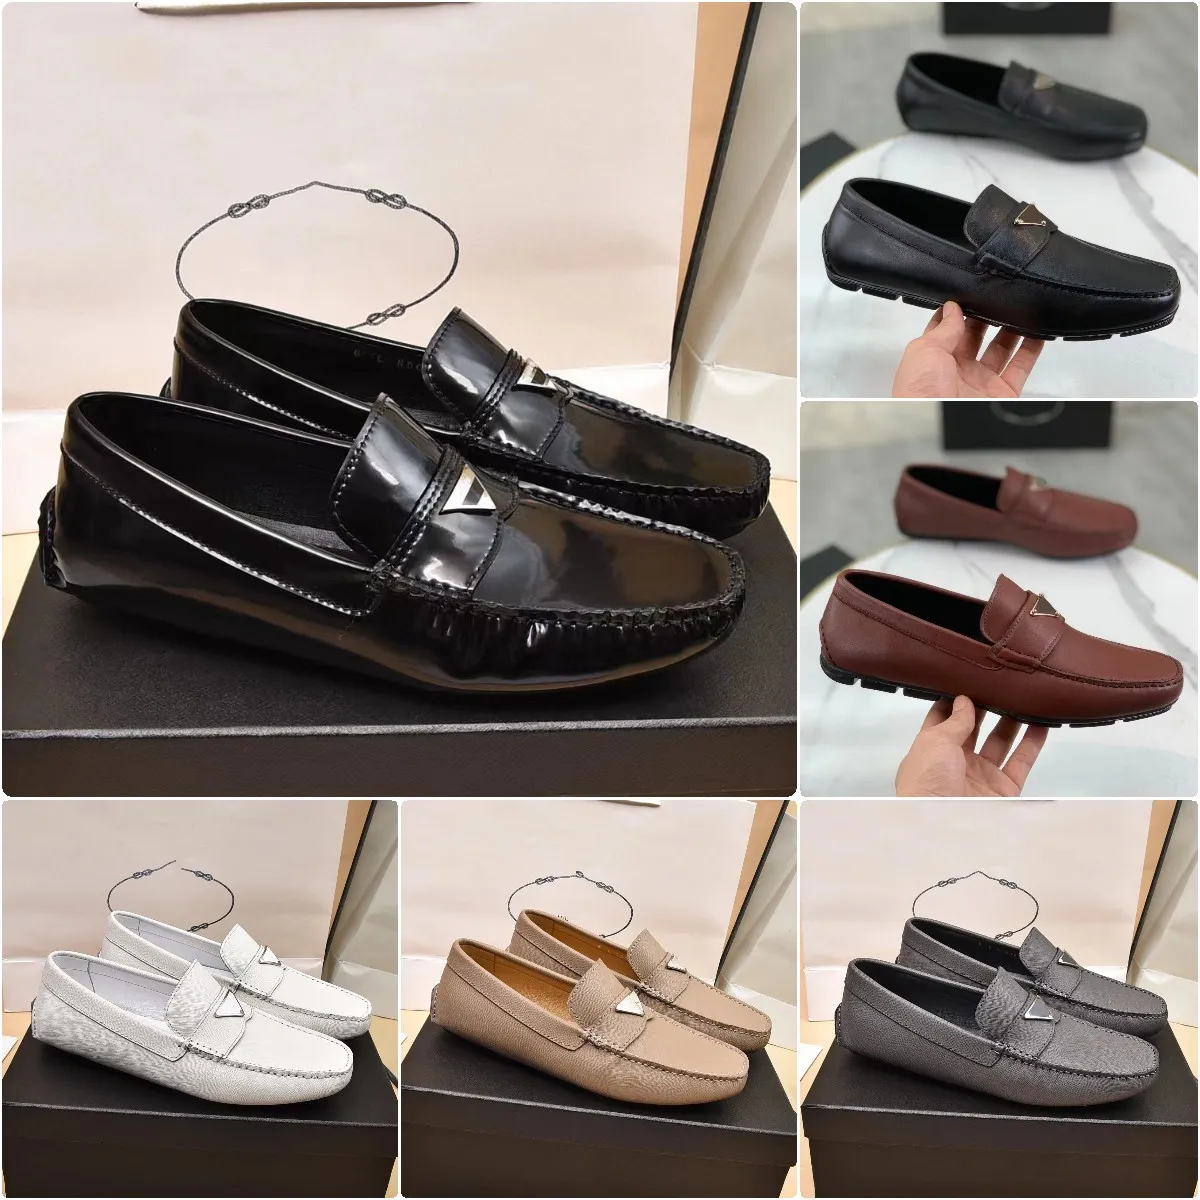 2023 New Men Saffiano Leather Driver loafers Designer High quality Bean shoes Classic Fashion cowhide sheepskin leisure loafers Shoes Size 38-45